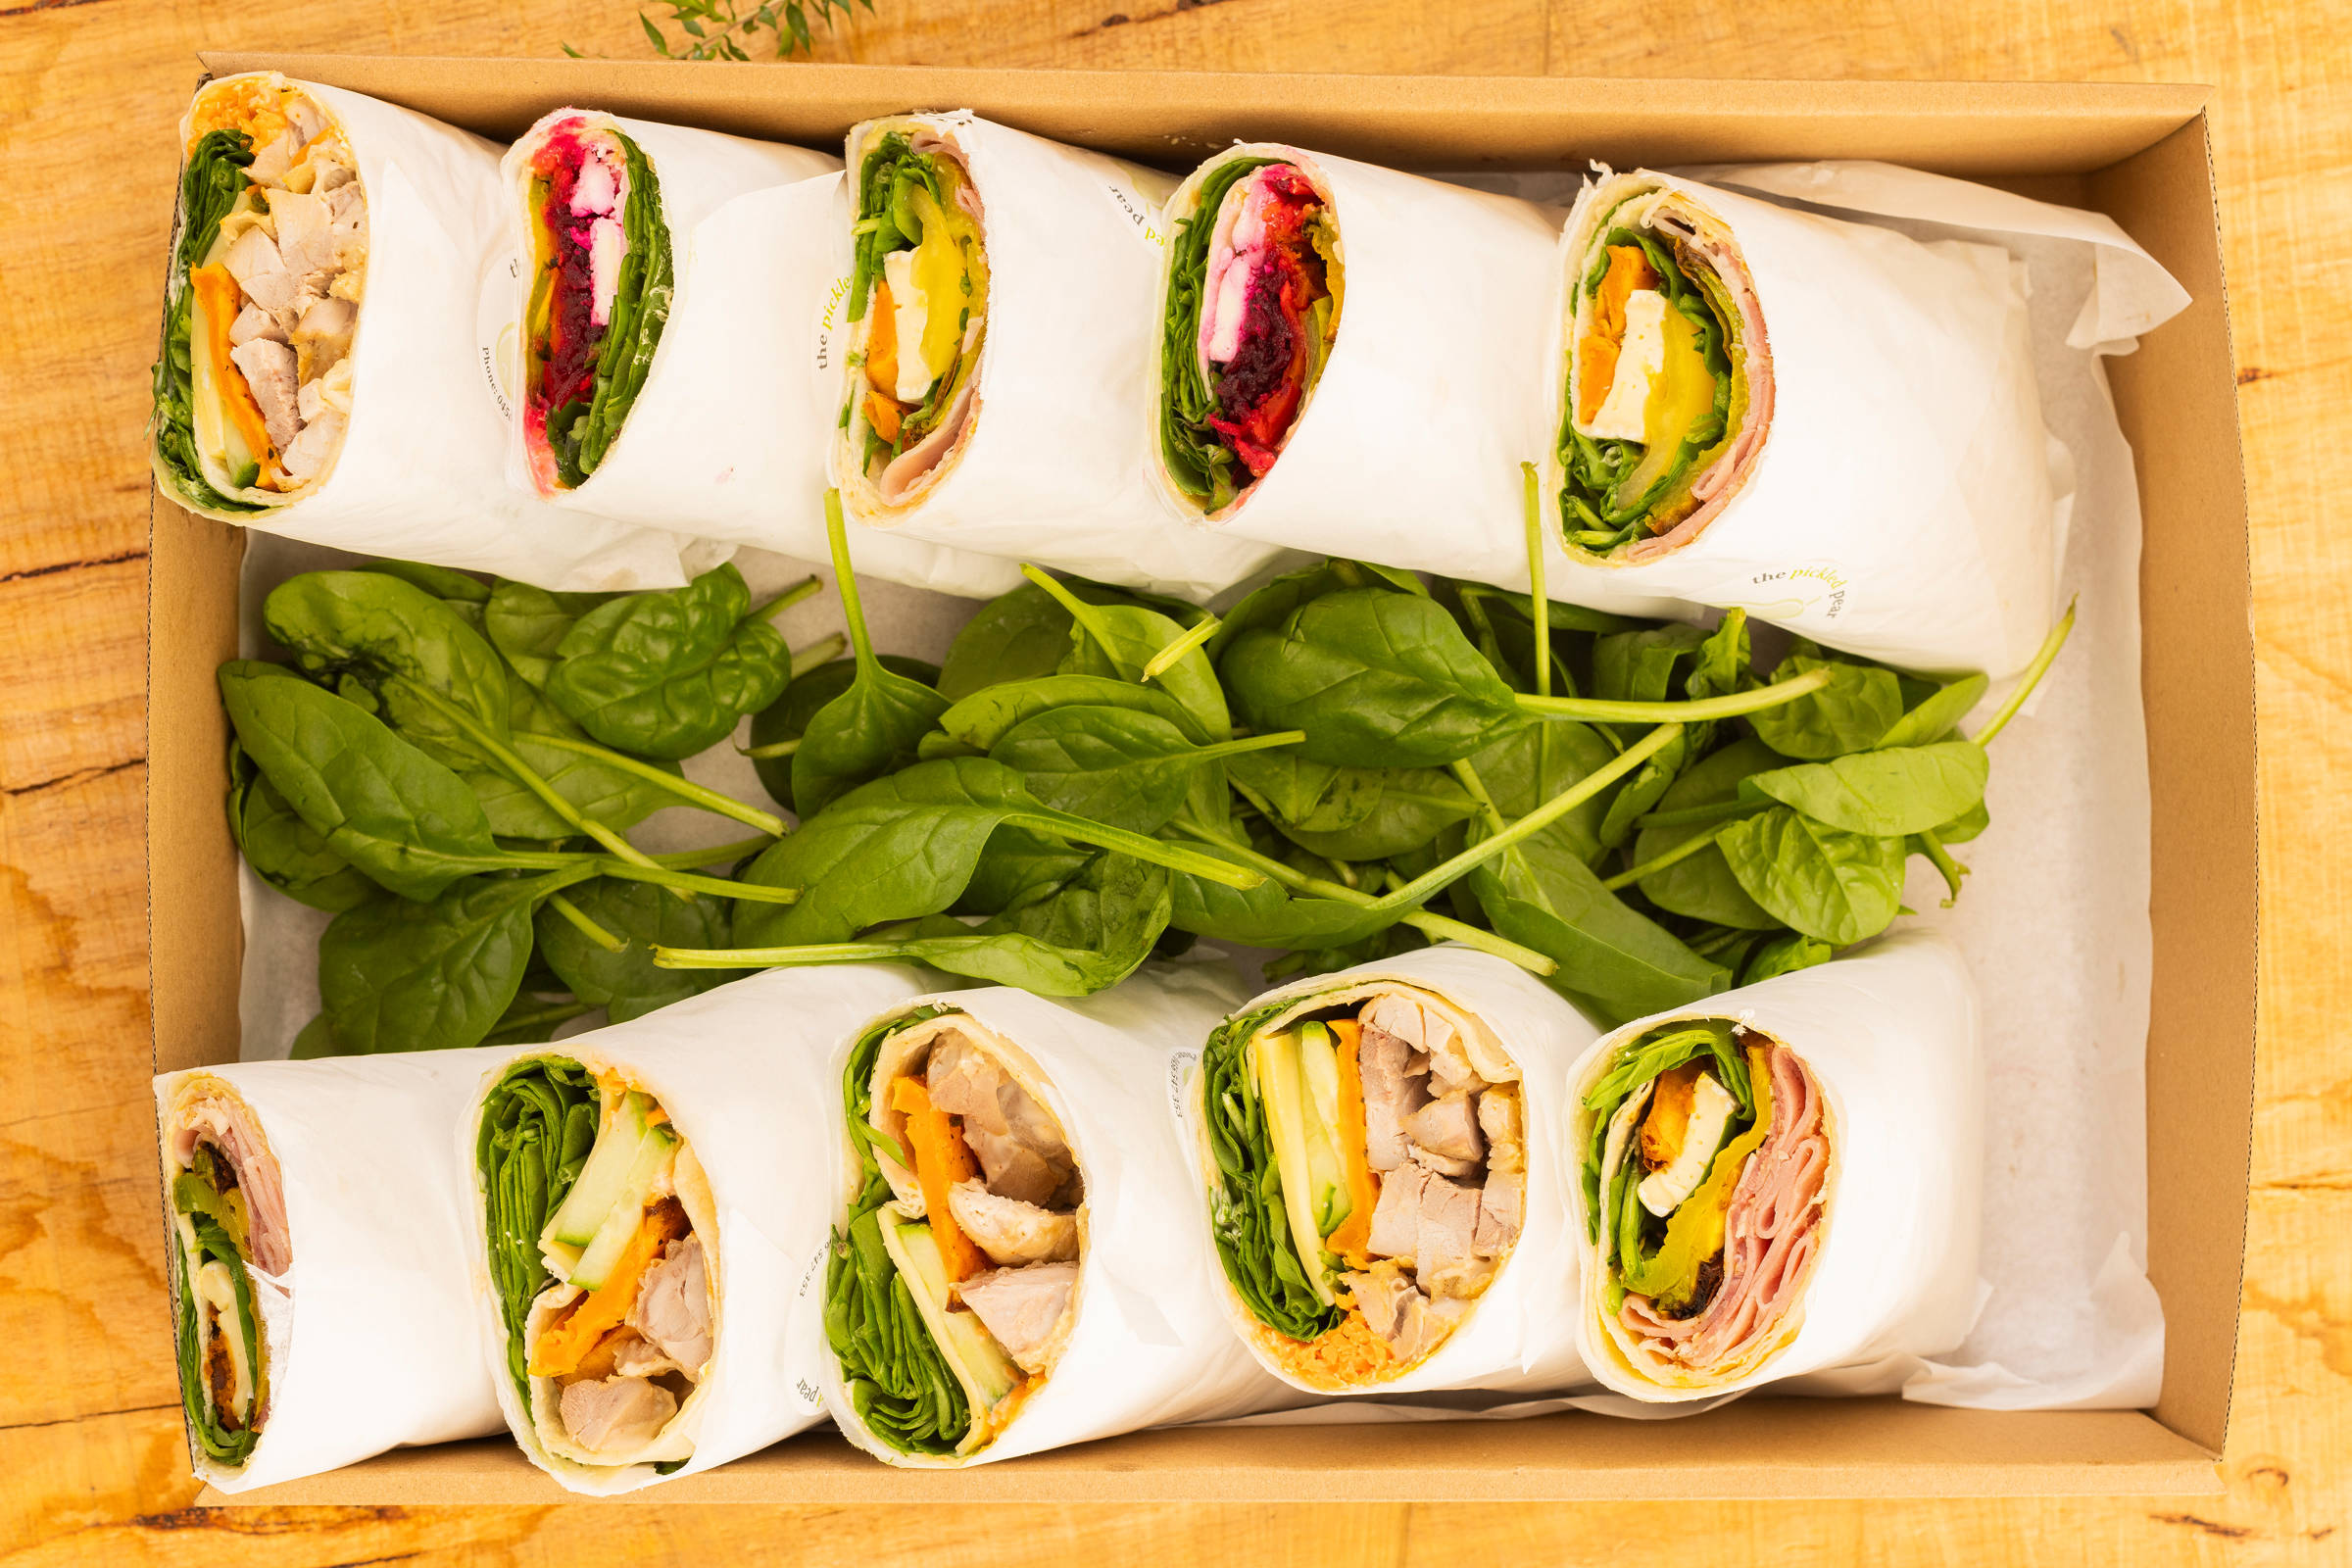 Wrap catering box containing 10 pieces, fillings include roasted vegetable, free range ham and salad, chicken and salad. Credit: Richard Jupe.